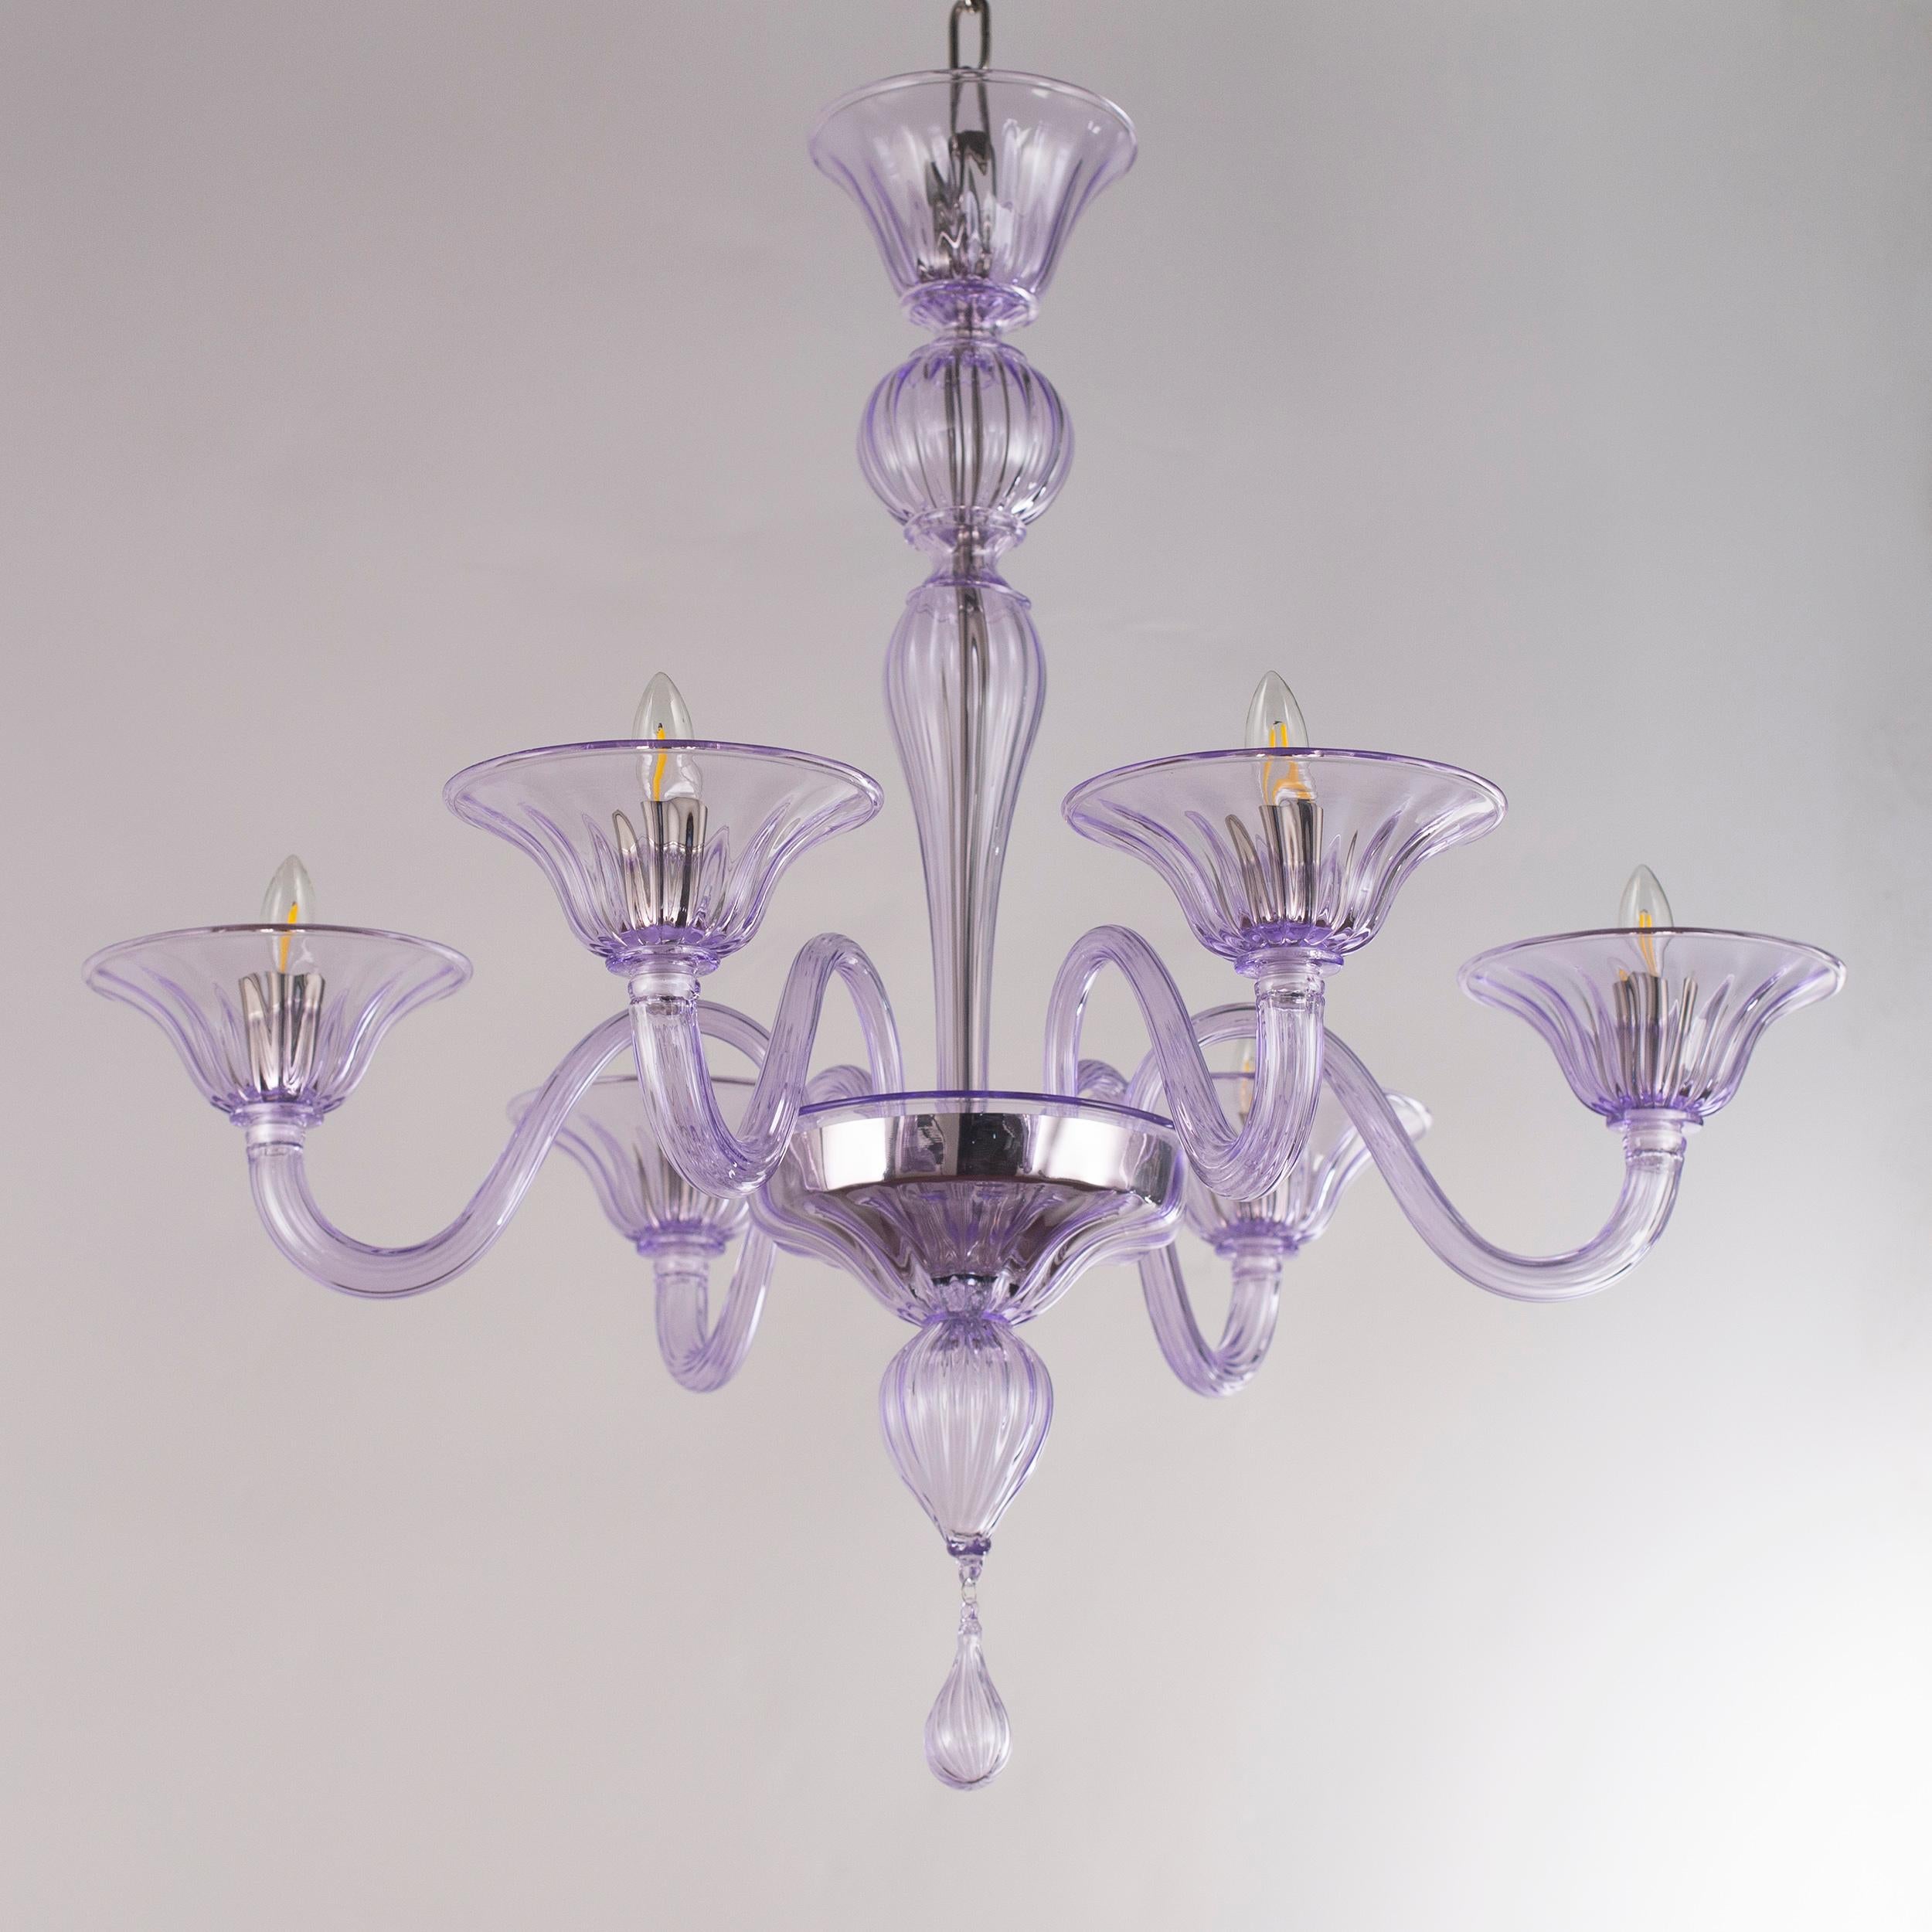 Simplicissimus 360 chandelier, 6 lights, light wisteria lavender artistic glass by Multiforme
This collection in Murano glass is characterized by superb simplicity. It is the result of a research which harks back to the Classic Murano chandeliers